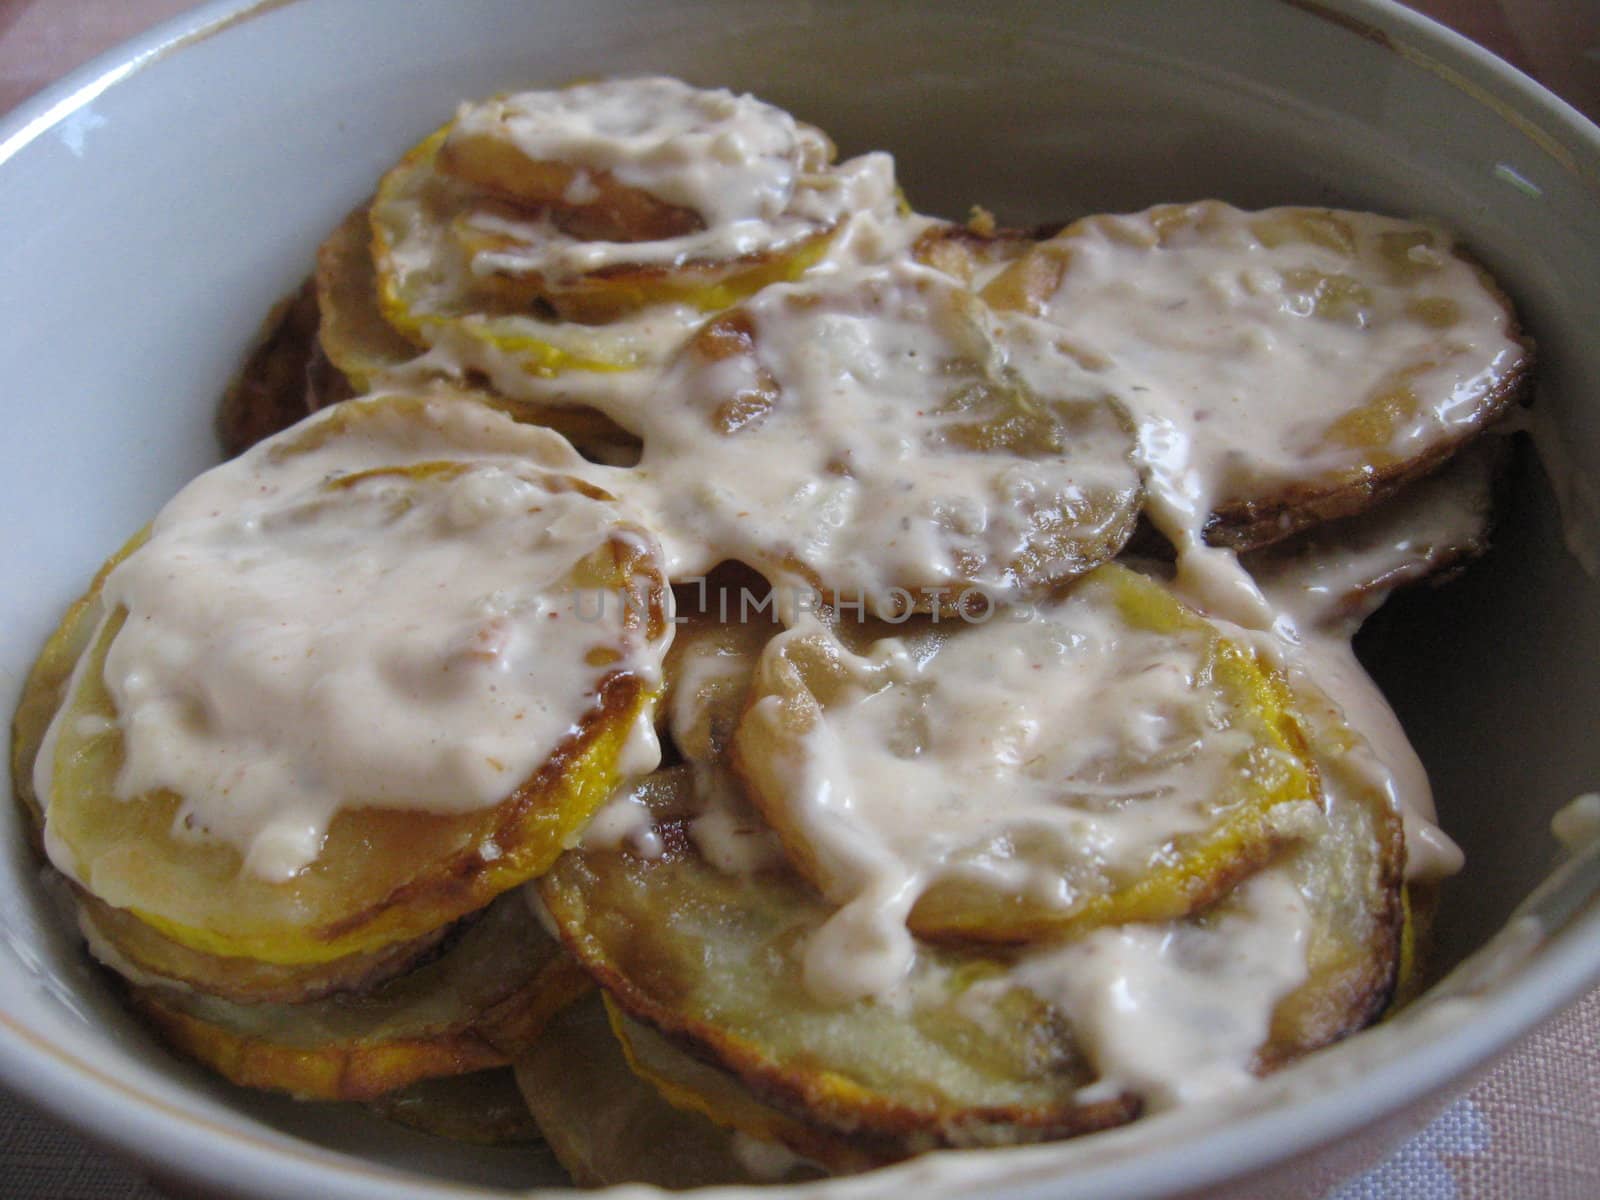 Dish from fried squash in sauce